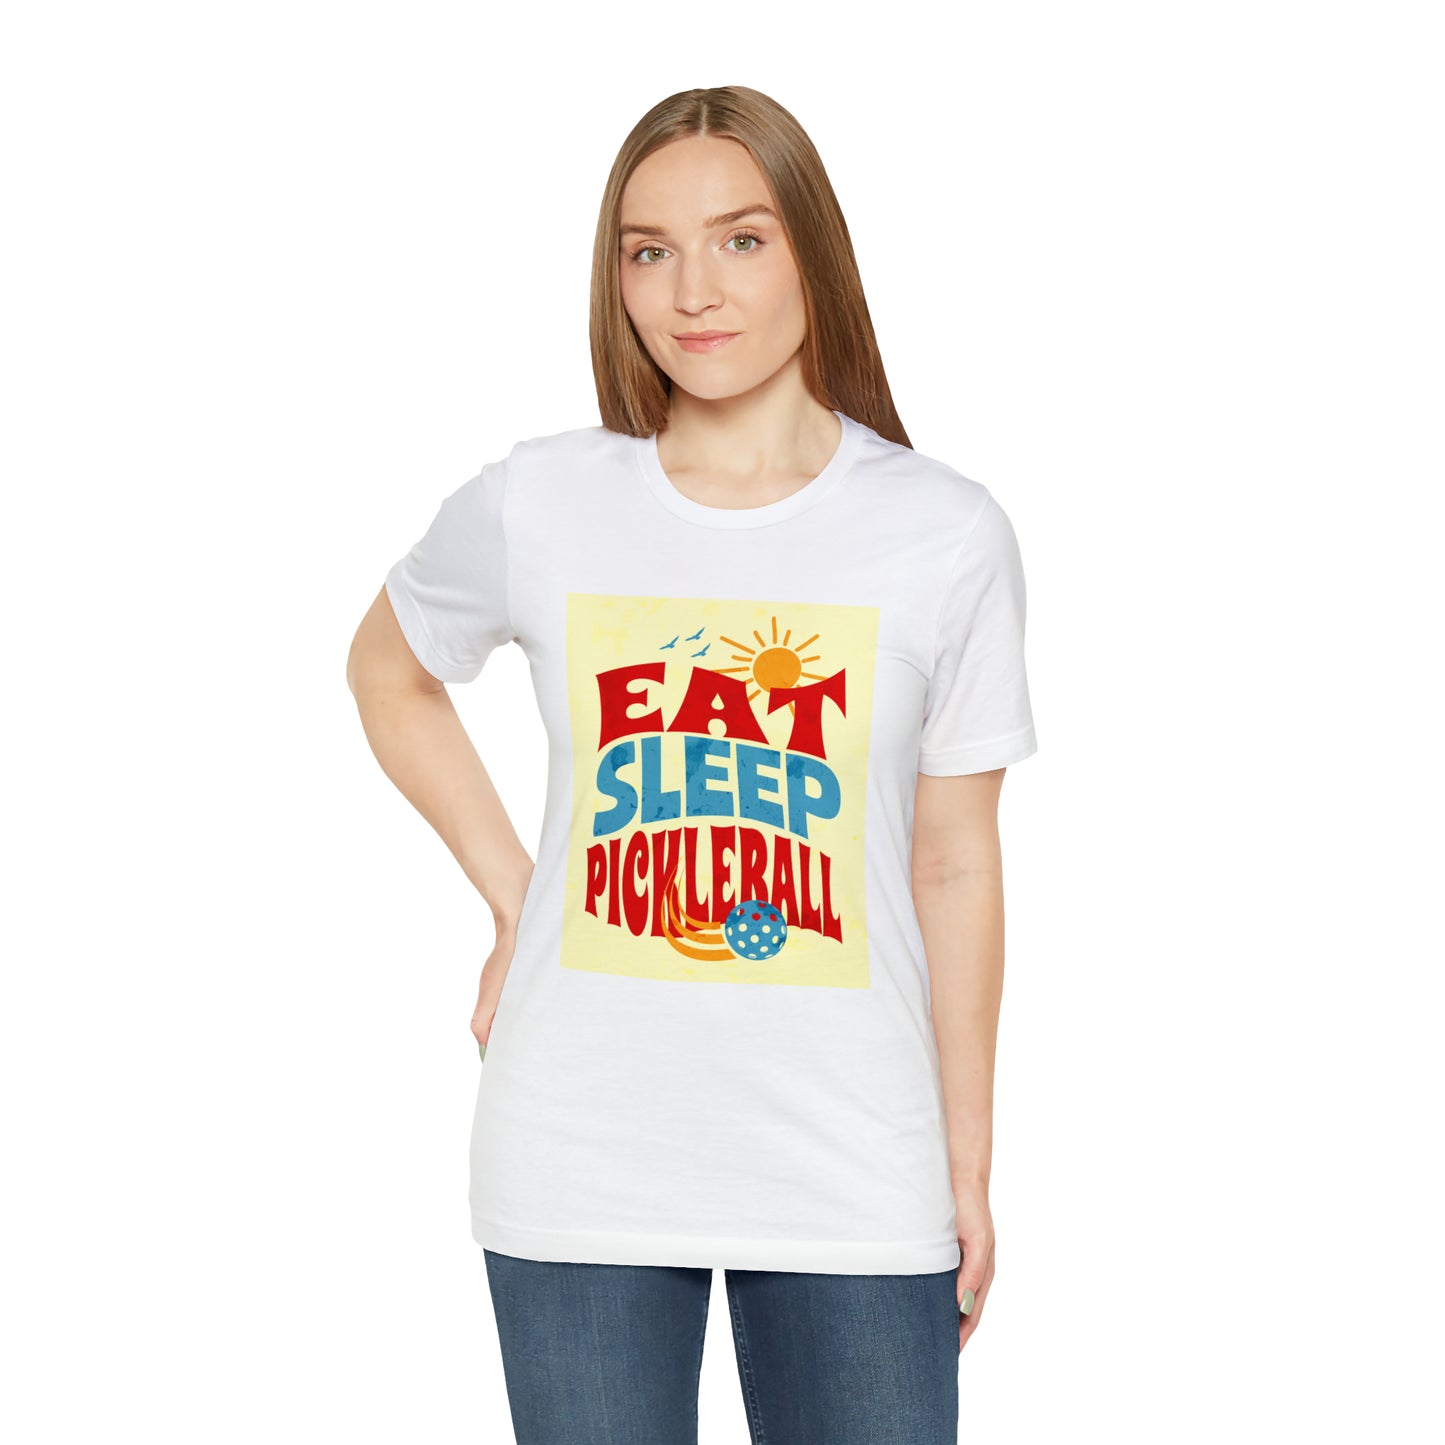 Eat. Sleep. Pickleball: T-Shirt for Passionate Players